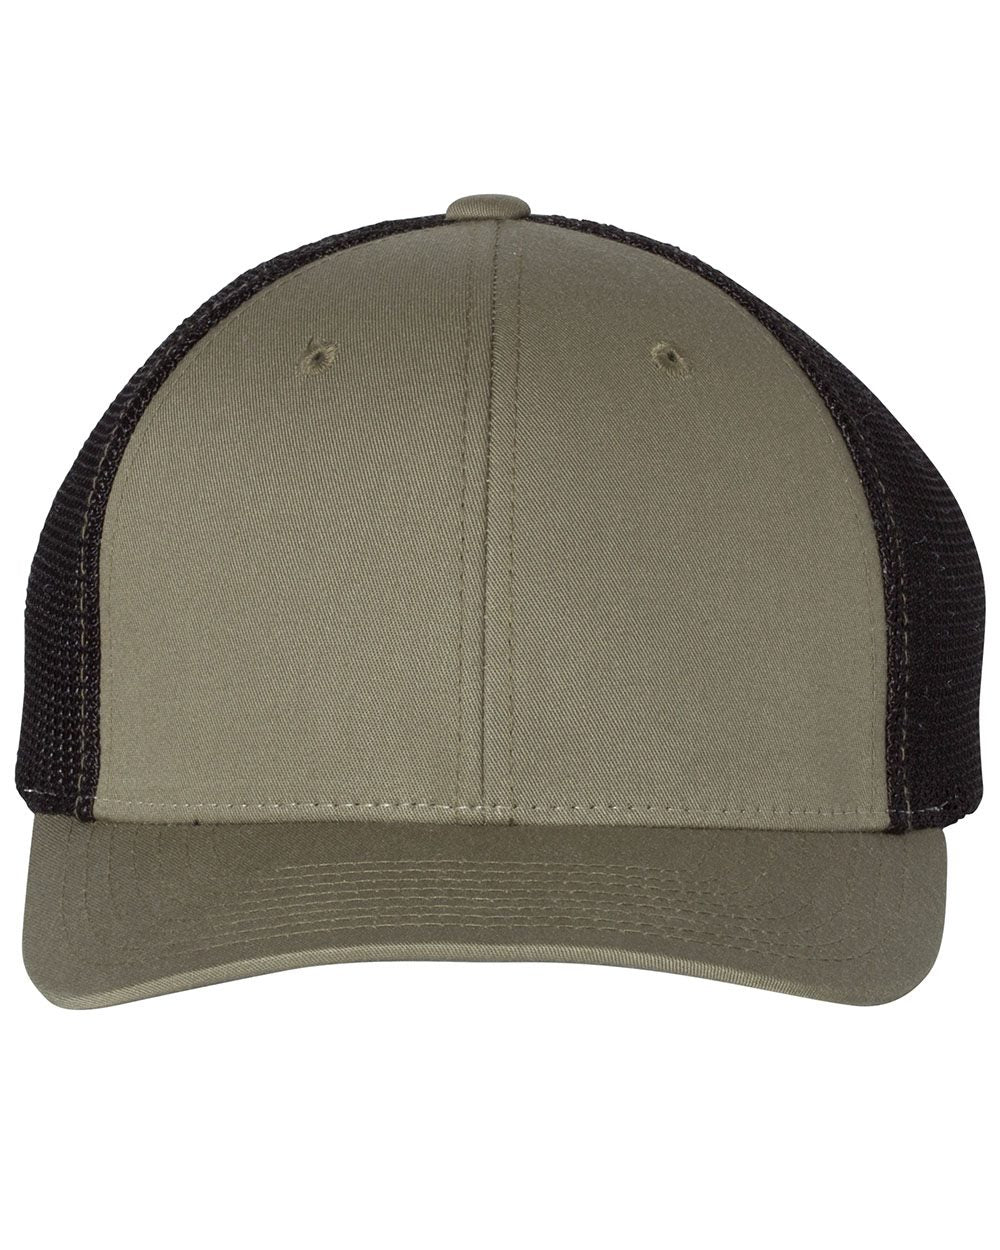 Richardson Fitted Trucker with R-Flex Cap 110 Richardson Fitted Trucker with R-Flex Cap 110